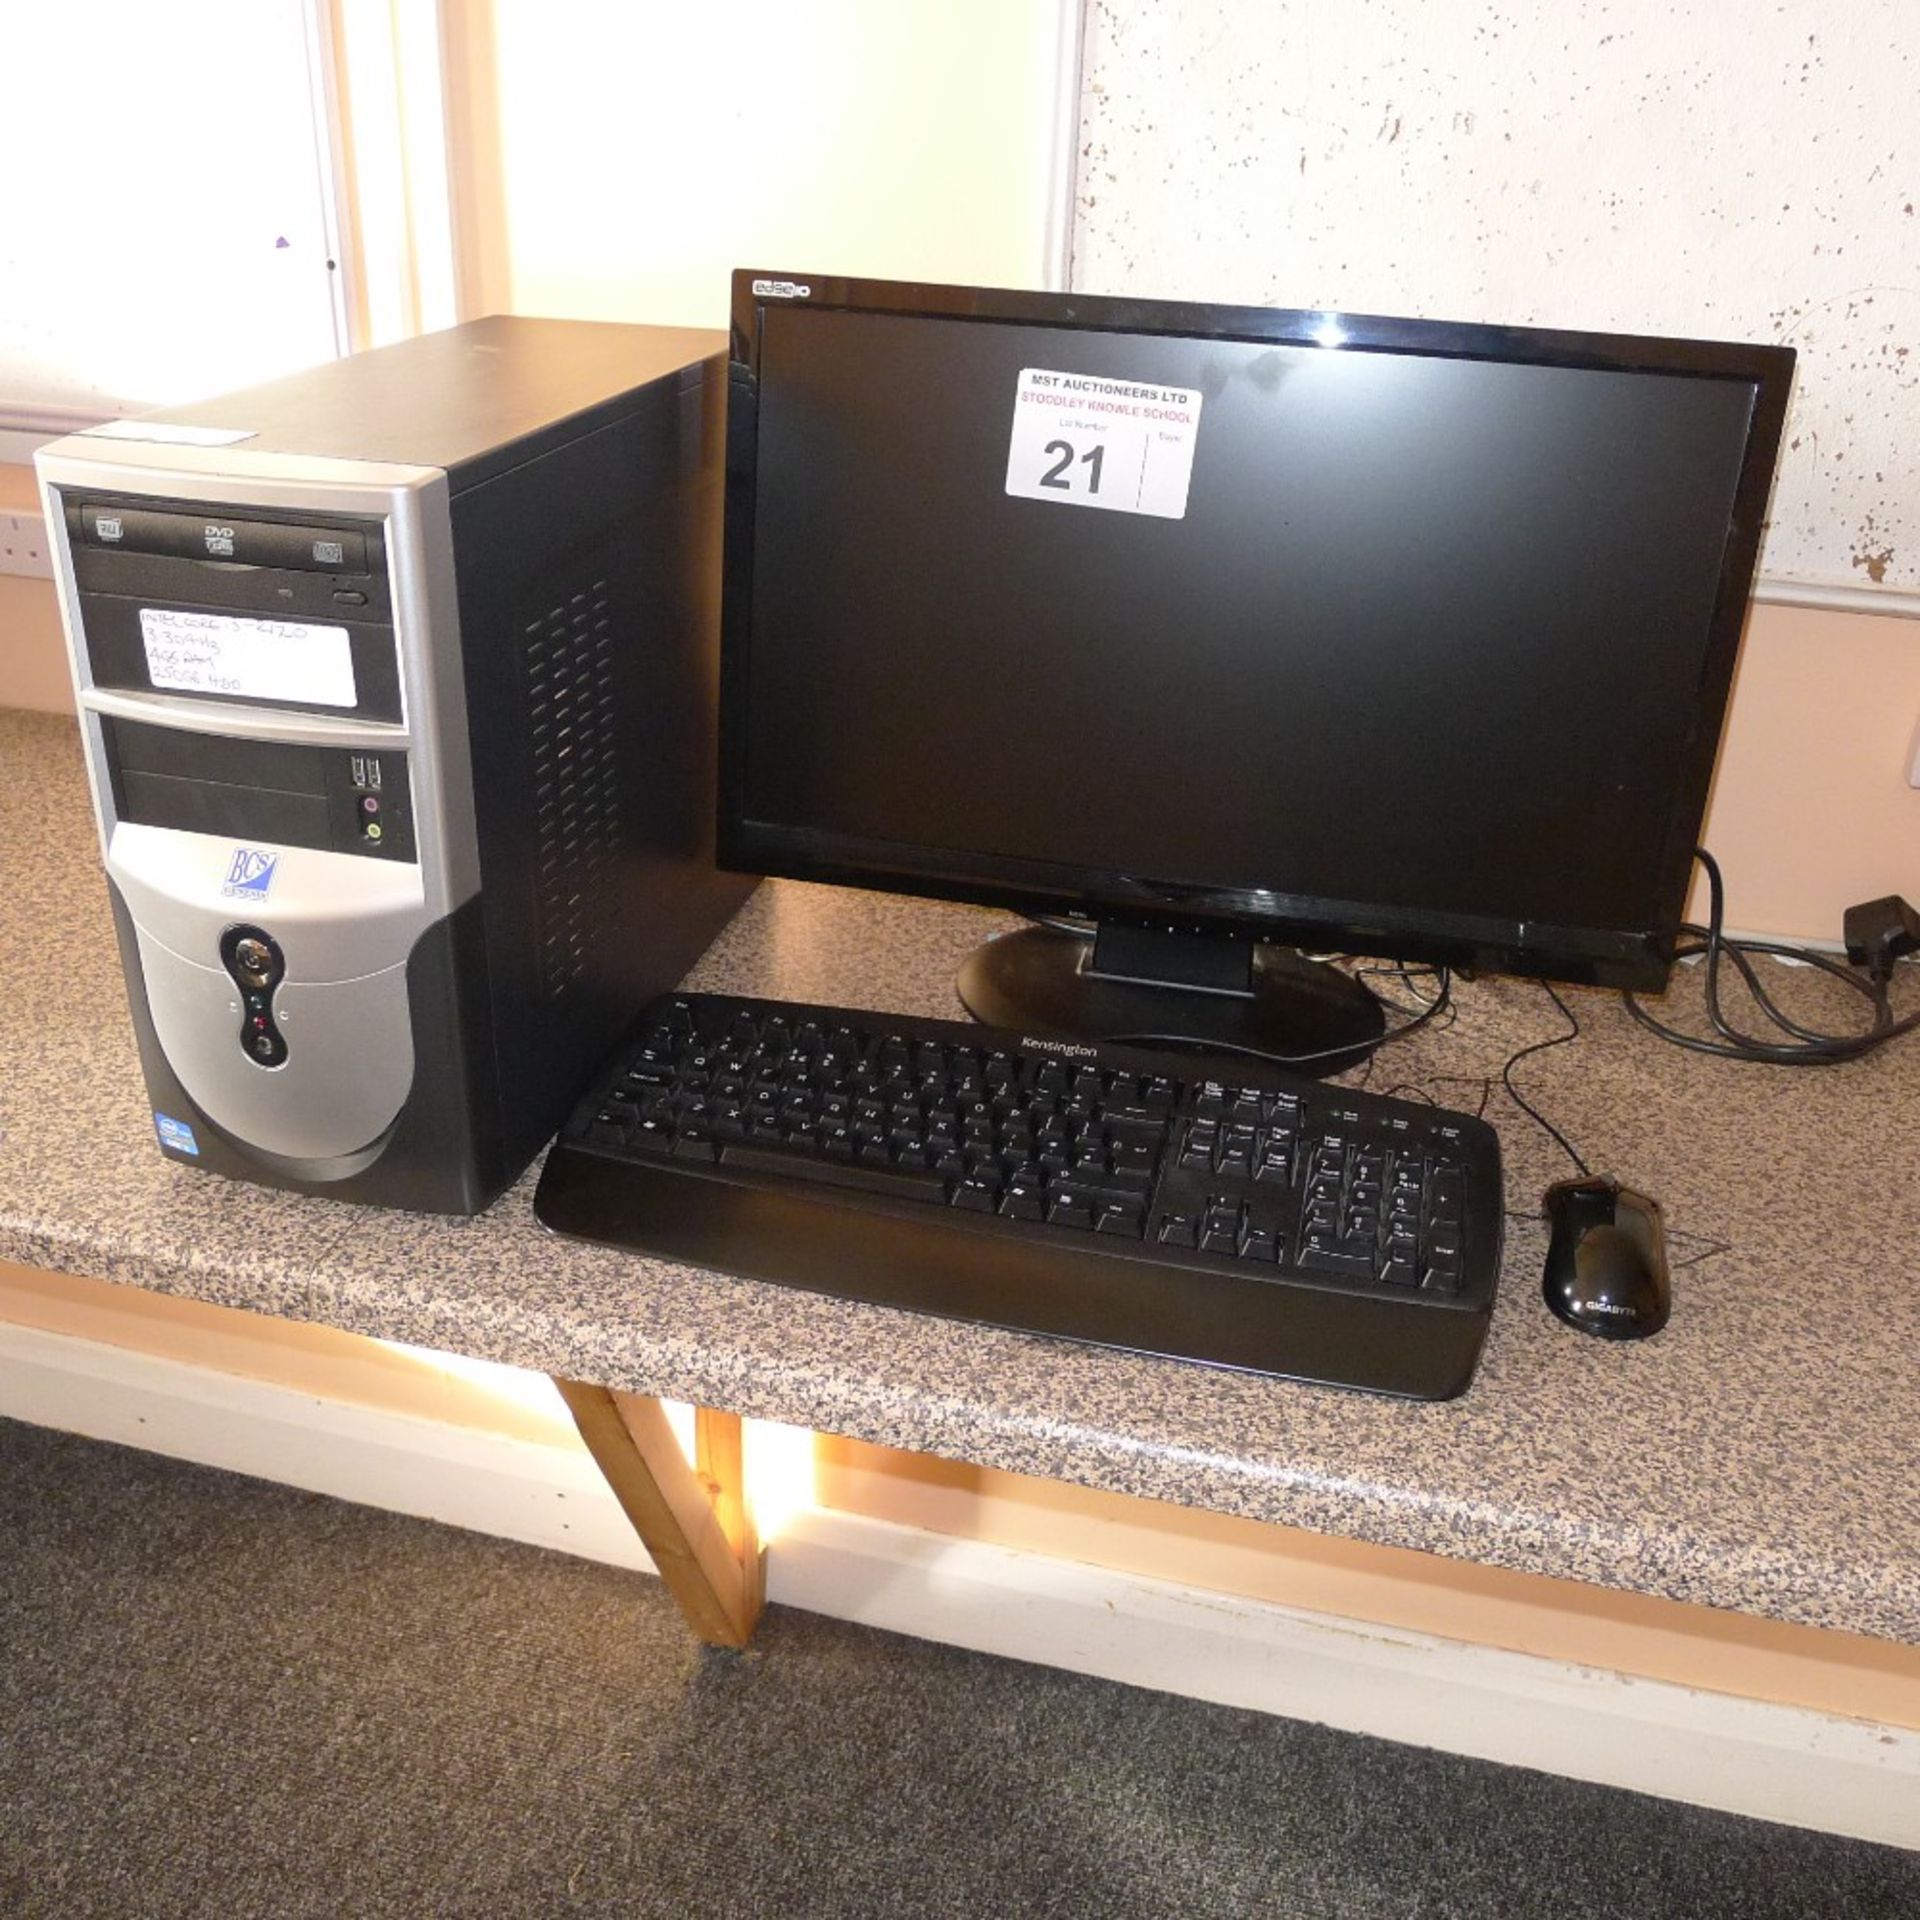 1 desktop computer with screen keyboards and mouse, INTEL i3 – 2120, 3.30GHz, 4GB ram, 250GB HDD